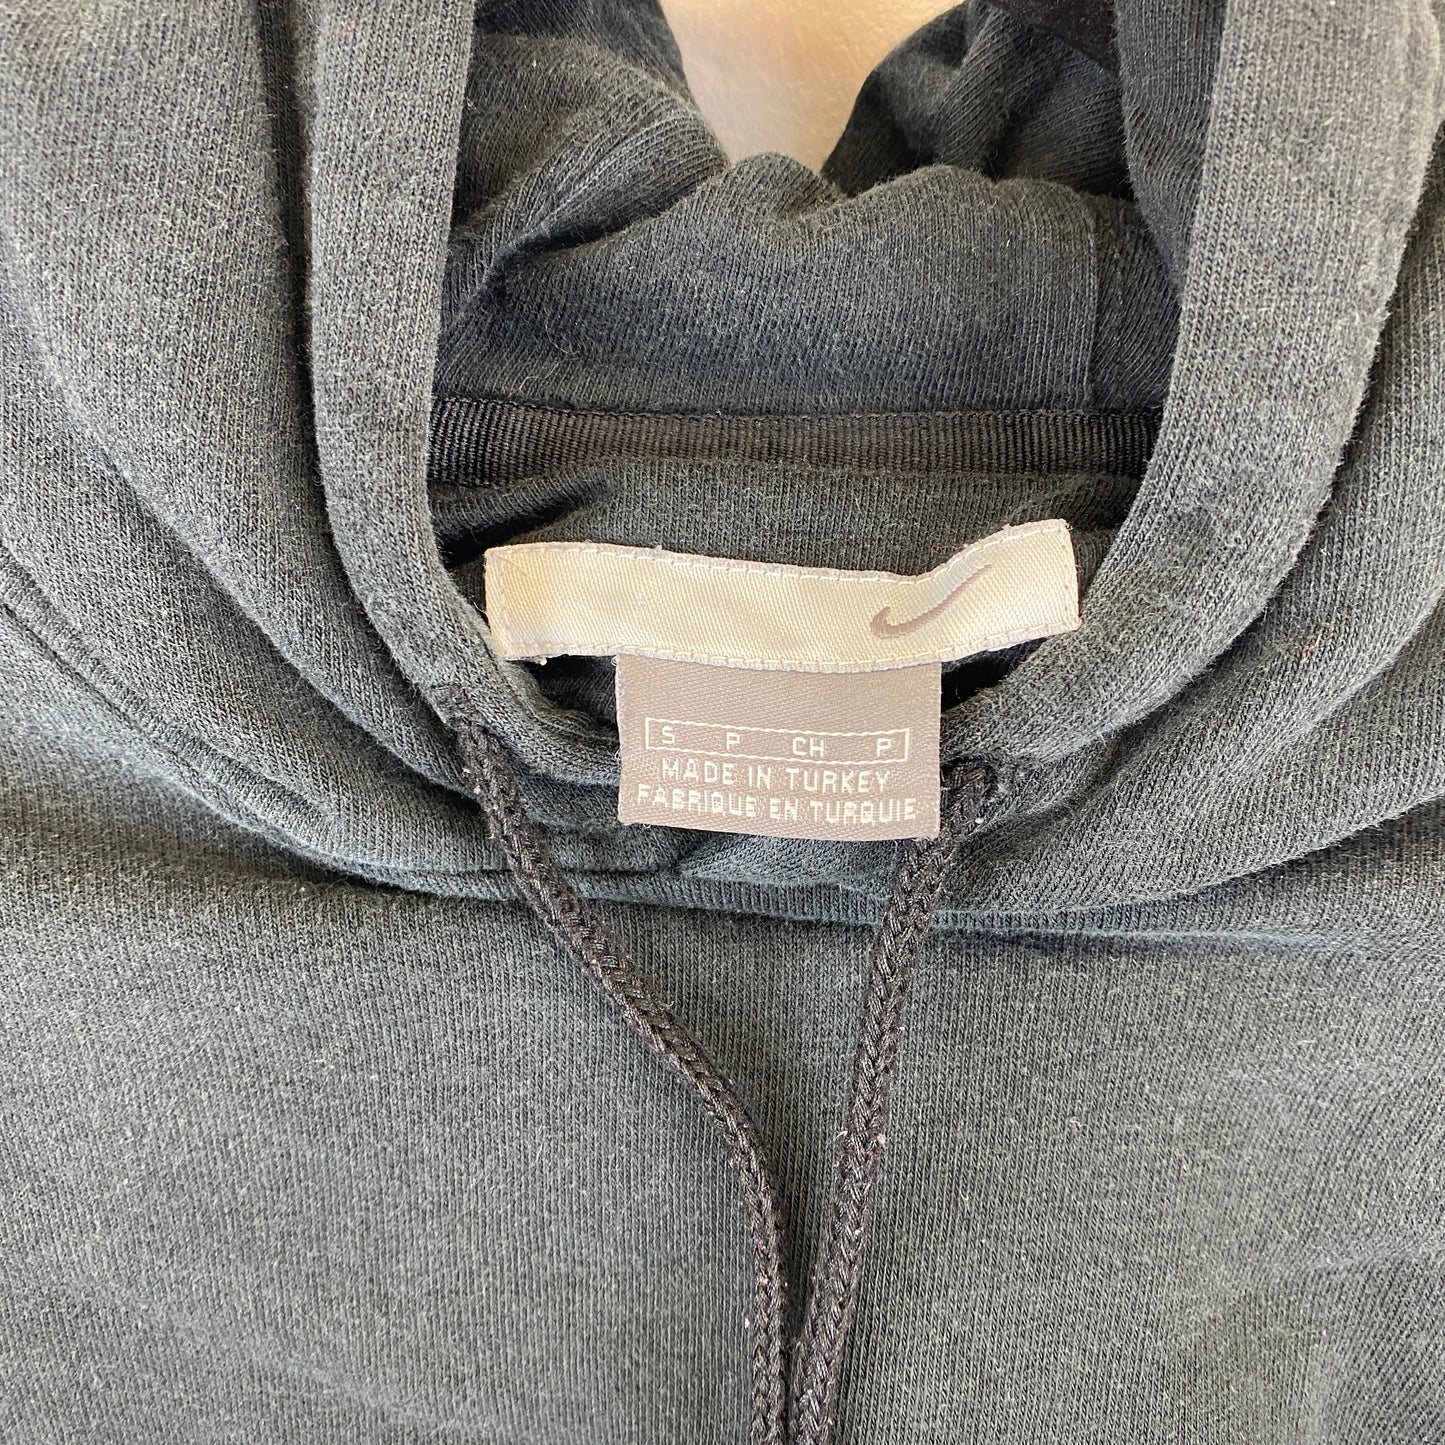 Nike embroidered hoodie (S)